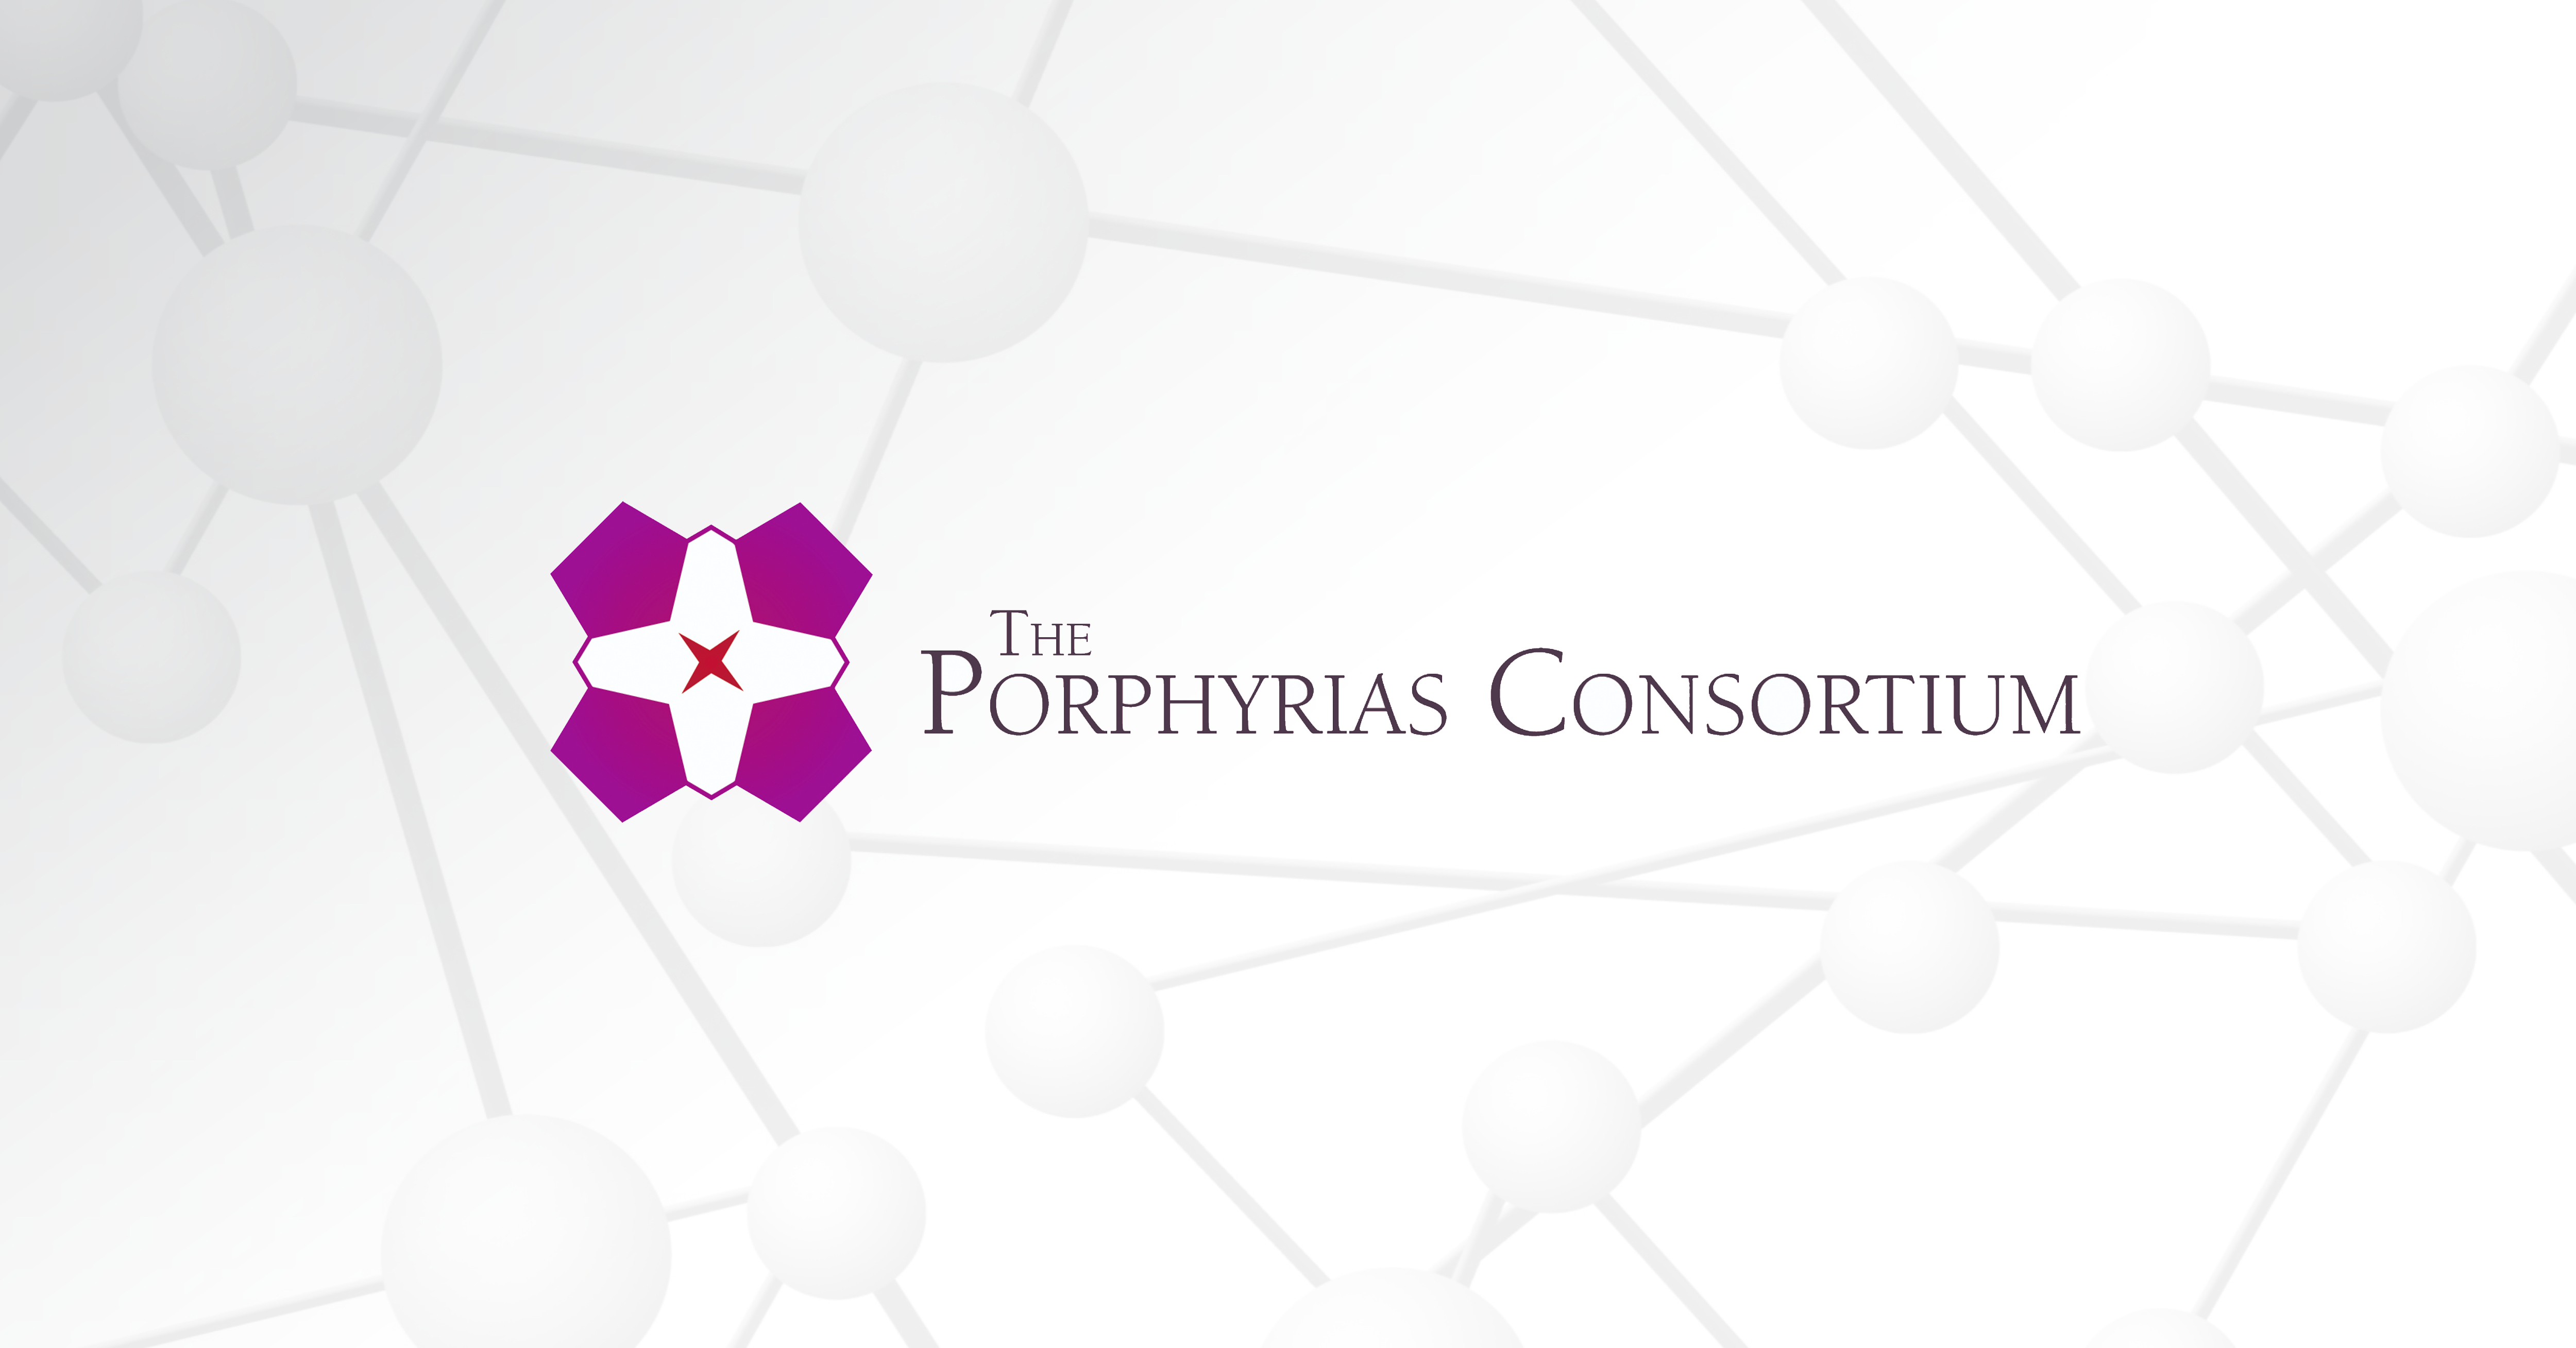 The Porphyrias Consortium logo appears over a gray graphic of molecules